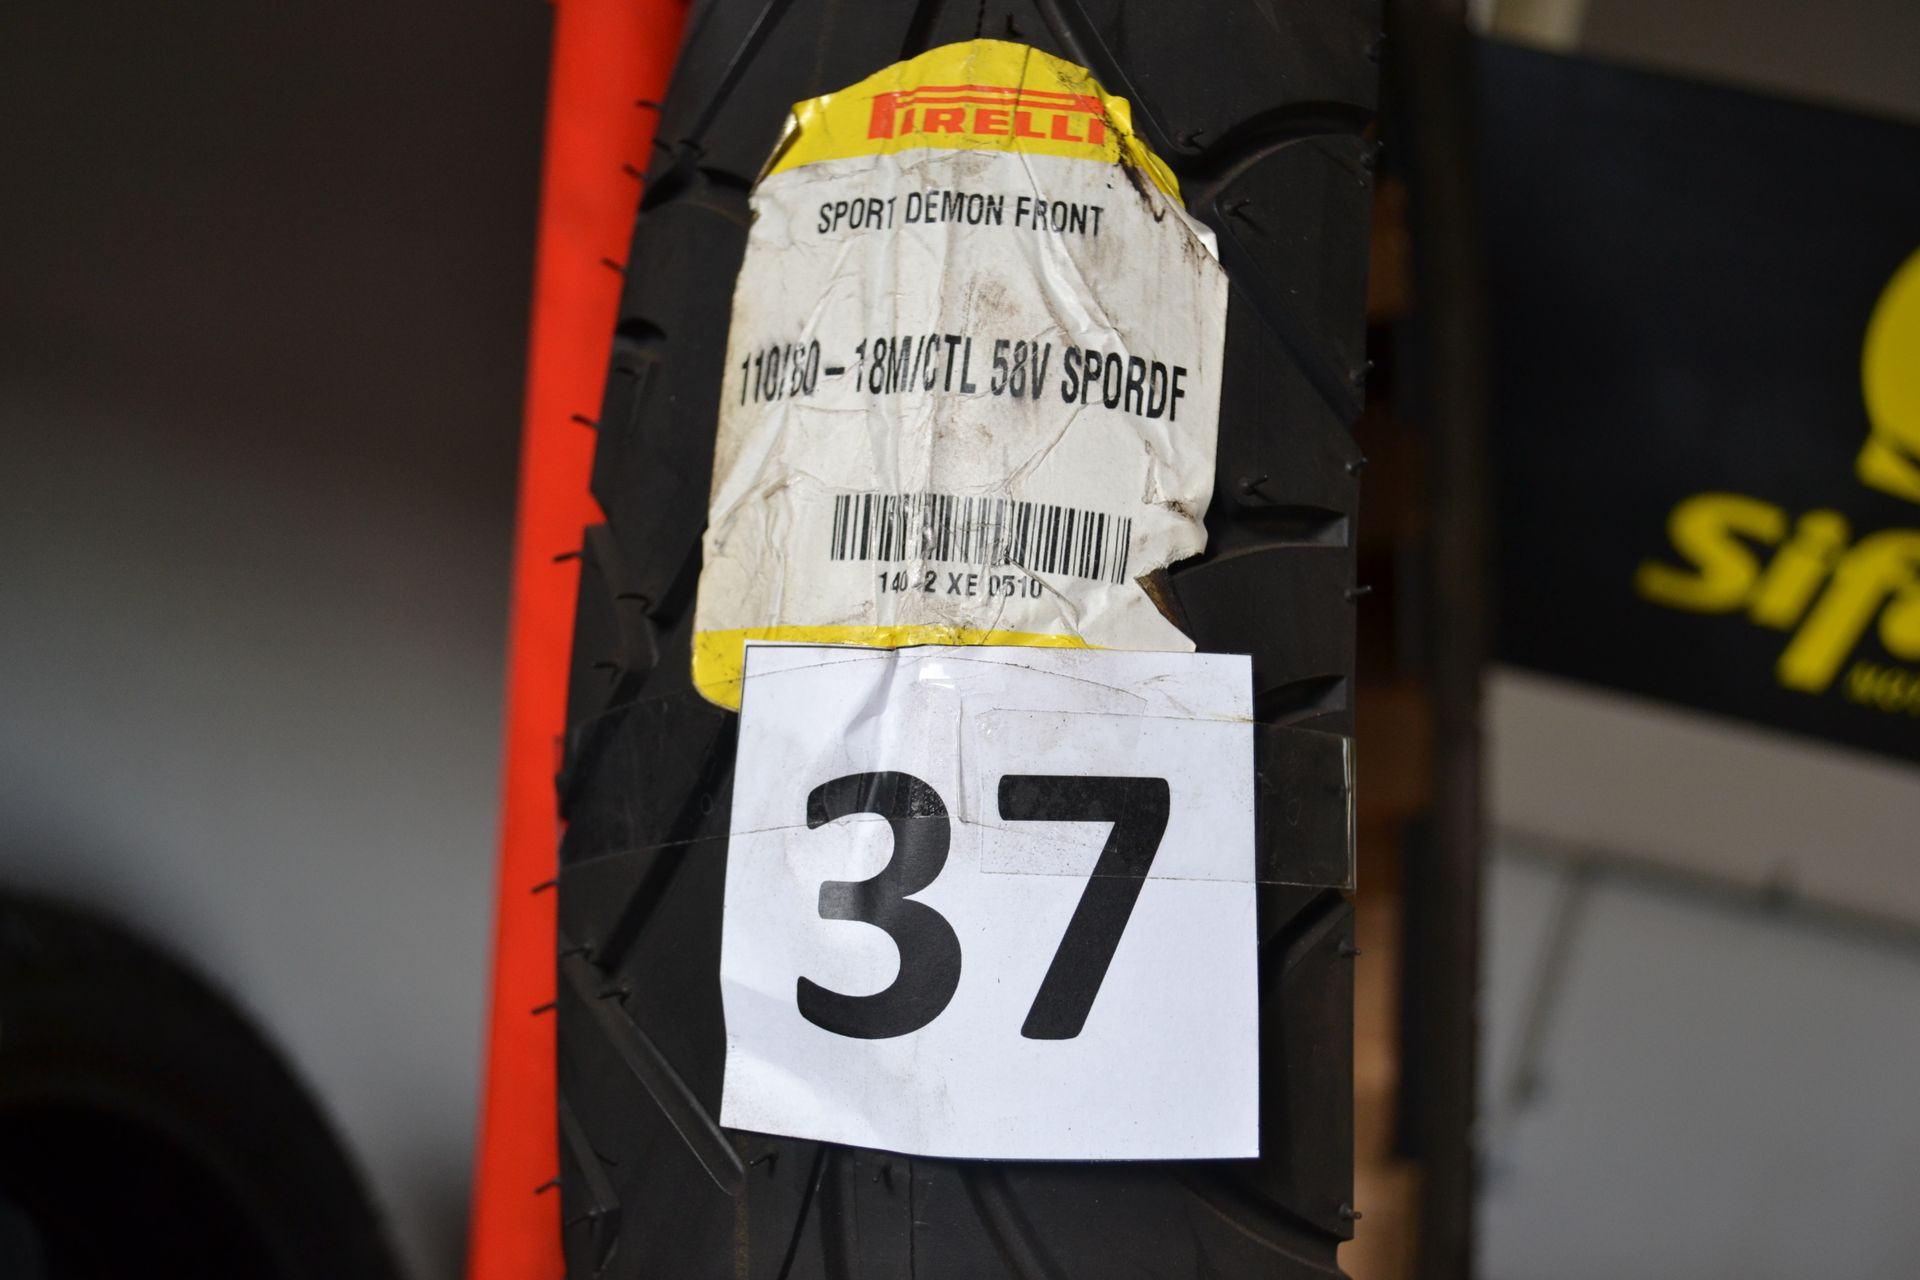 Null PIRELLI SPORT DEMON FRONT tire, 110*80*18M, Year of manufacture 2010